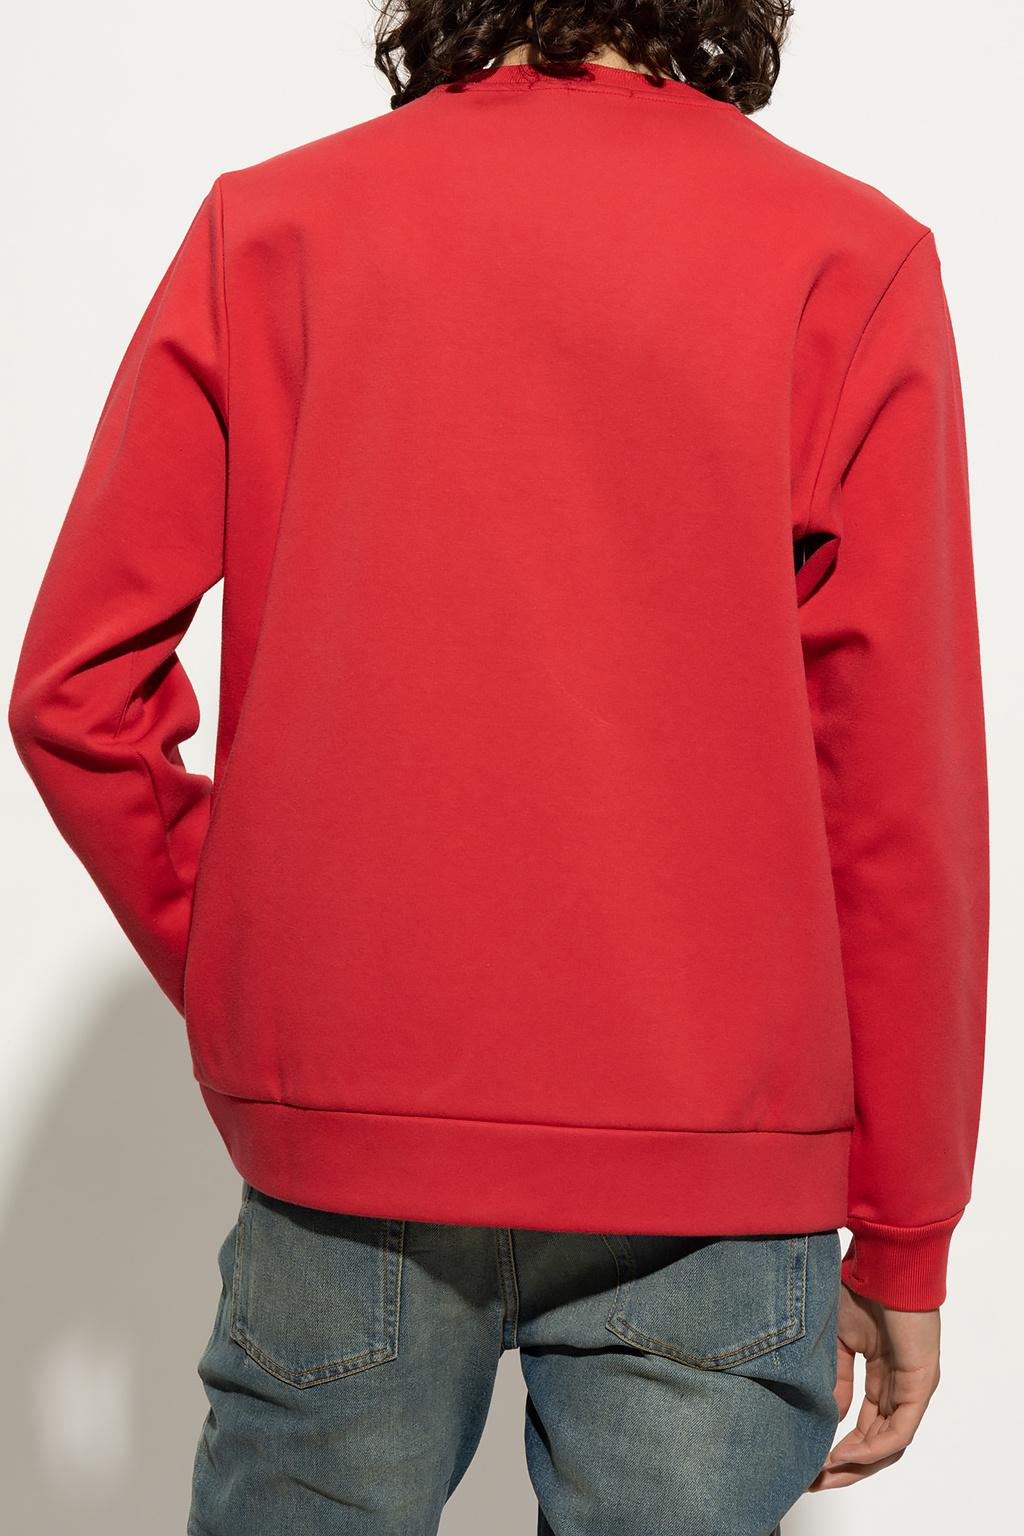 Stone Island Cotton Sweatshirt With Logo in Red for Men | Lyst